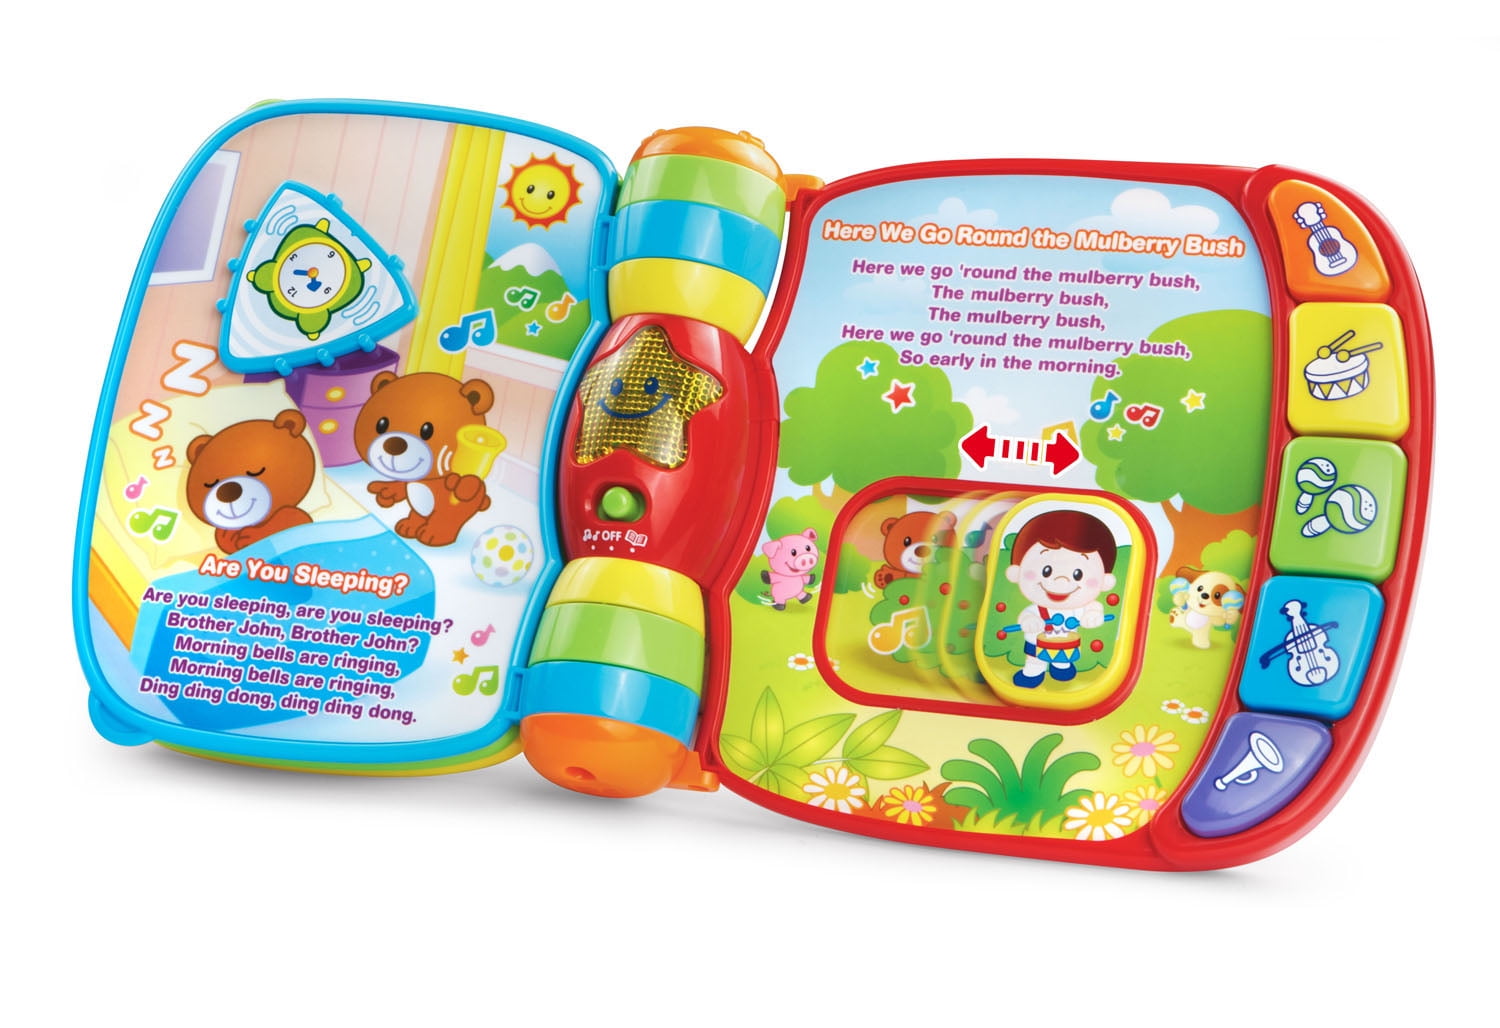 VTech 80166700 Musical Rhymes Educational Book for Babies Pink for sale online 